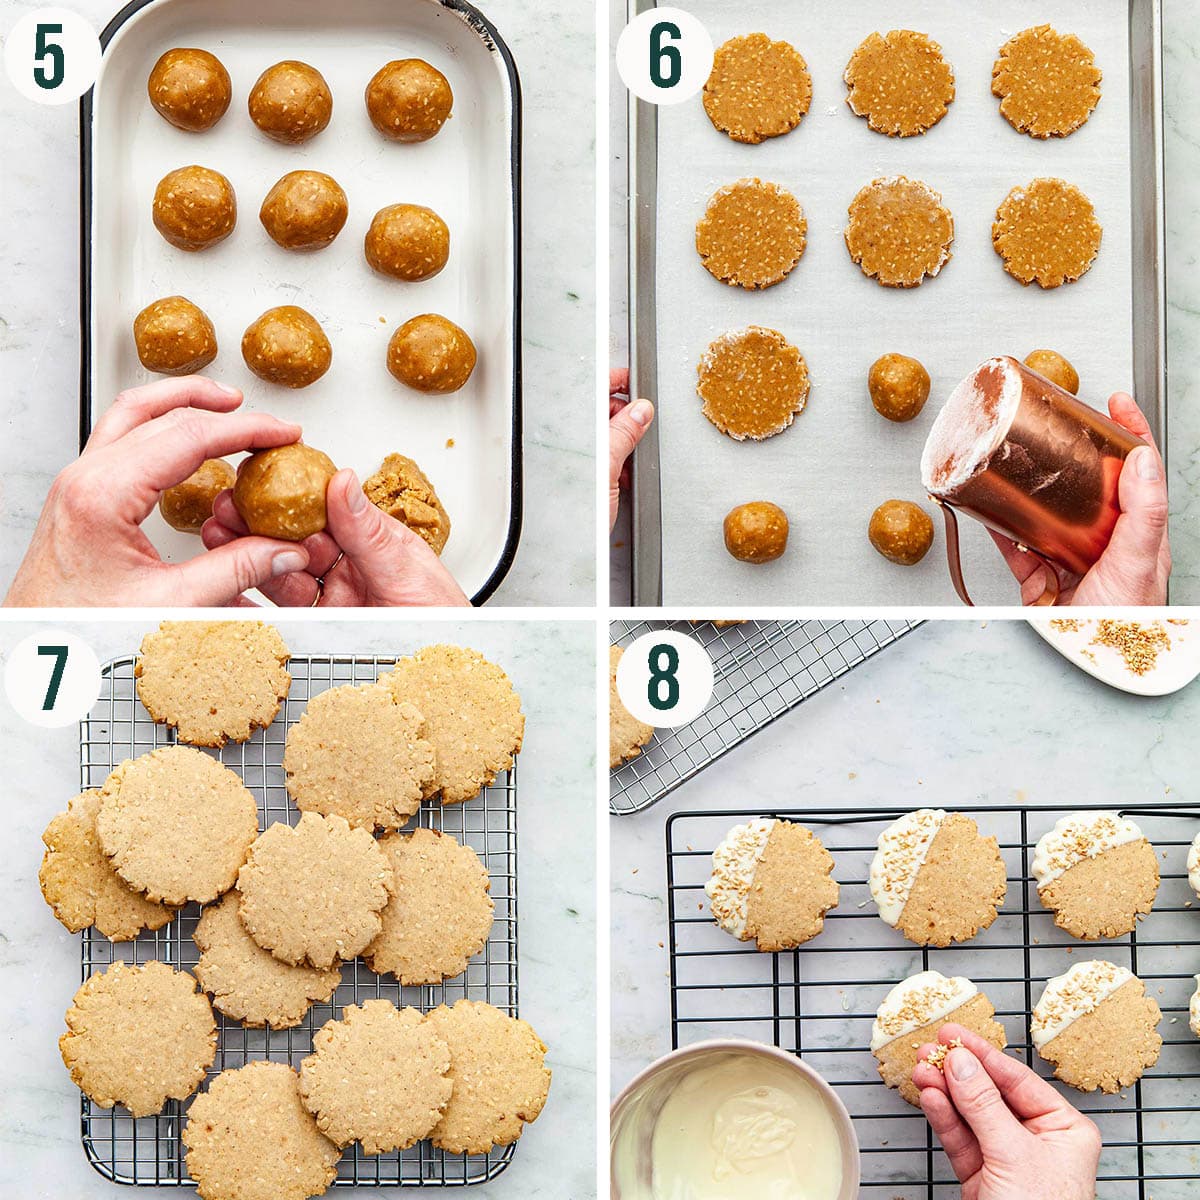 Sesame cookies steps 5 to 8, rolling and pressing the dough, baked cookies, and decorating.